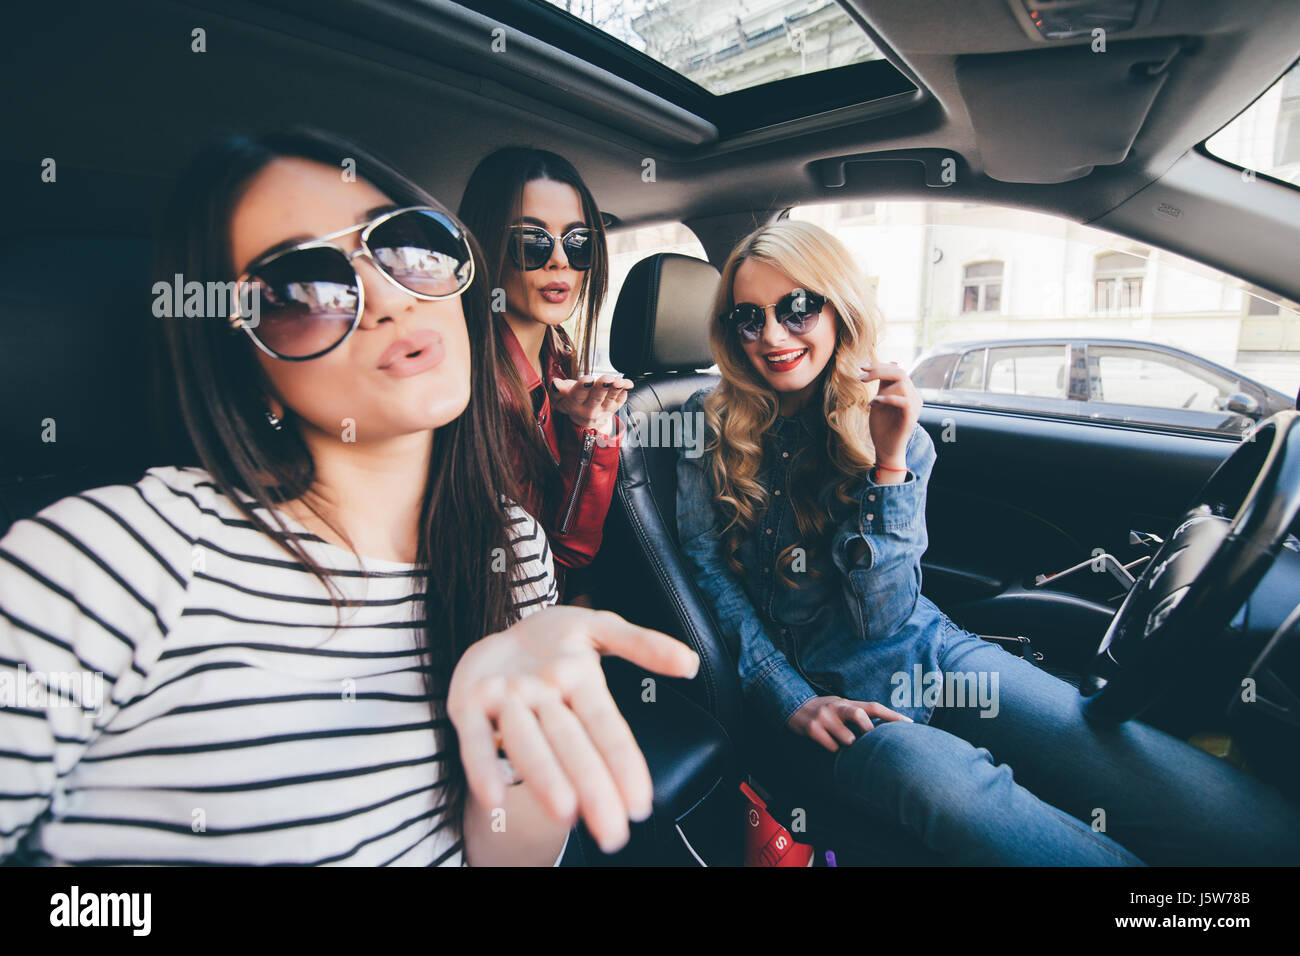 Group Of Girls Having Fun In The Car And Taking Selfies With Camera 